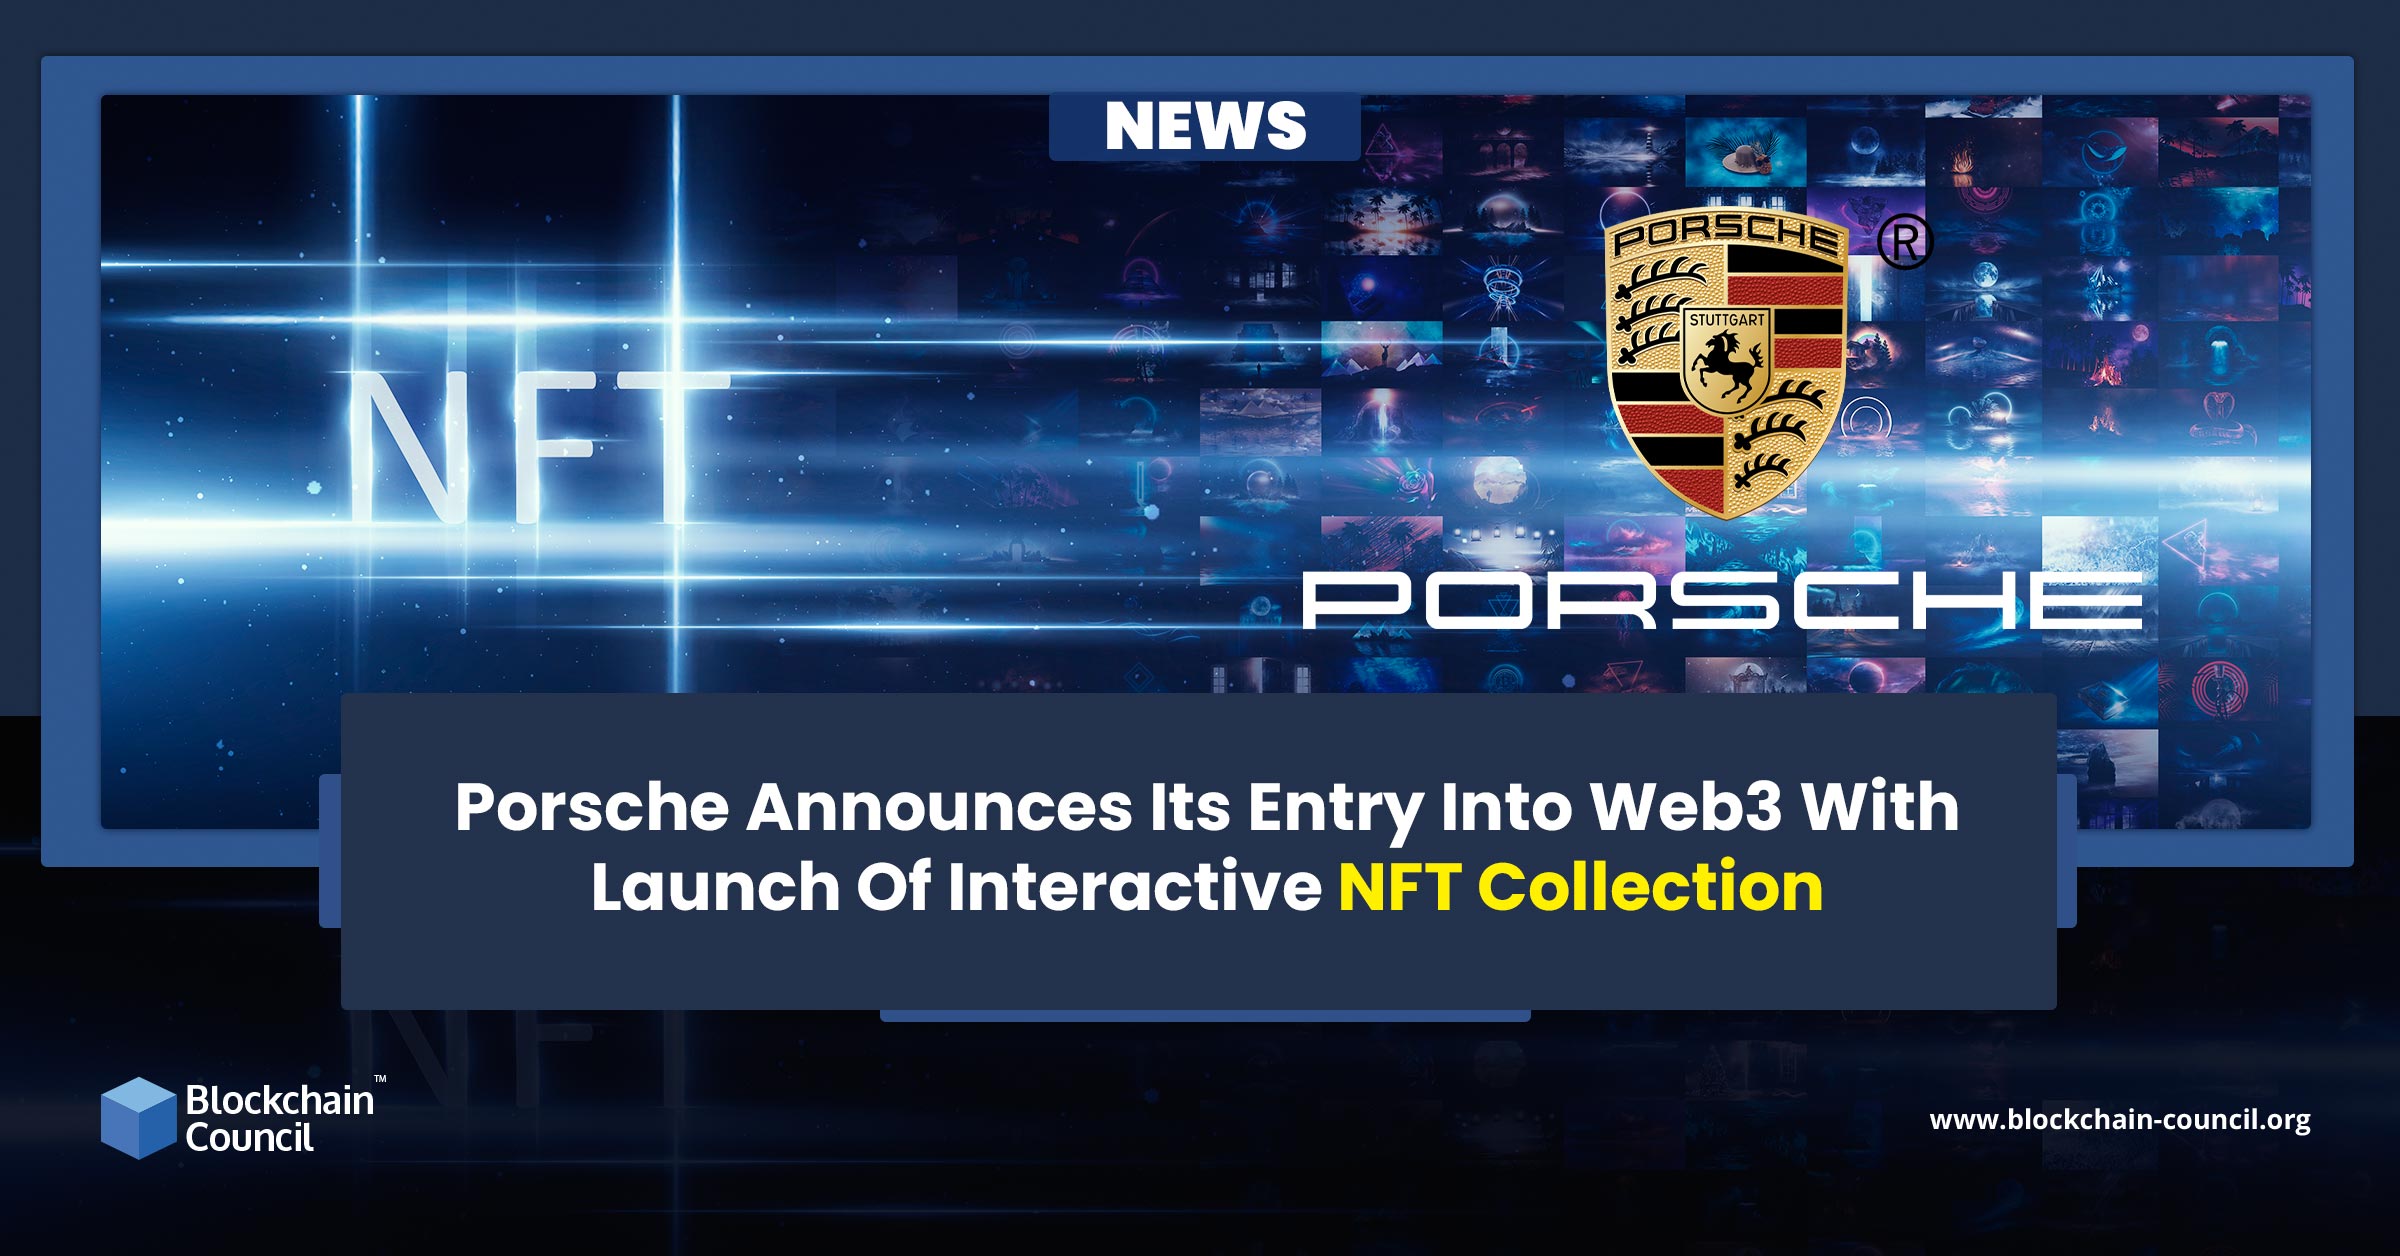 Porsche Announces Its Entry Into Web3 With Launch Of Interactive NFT Collection